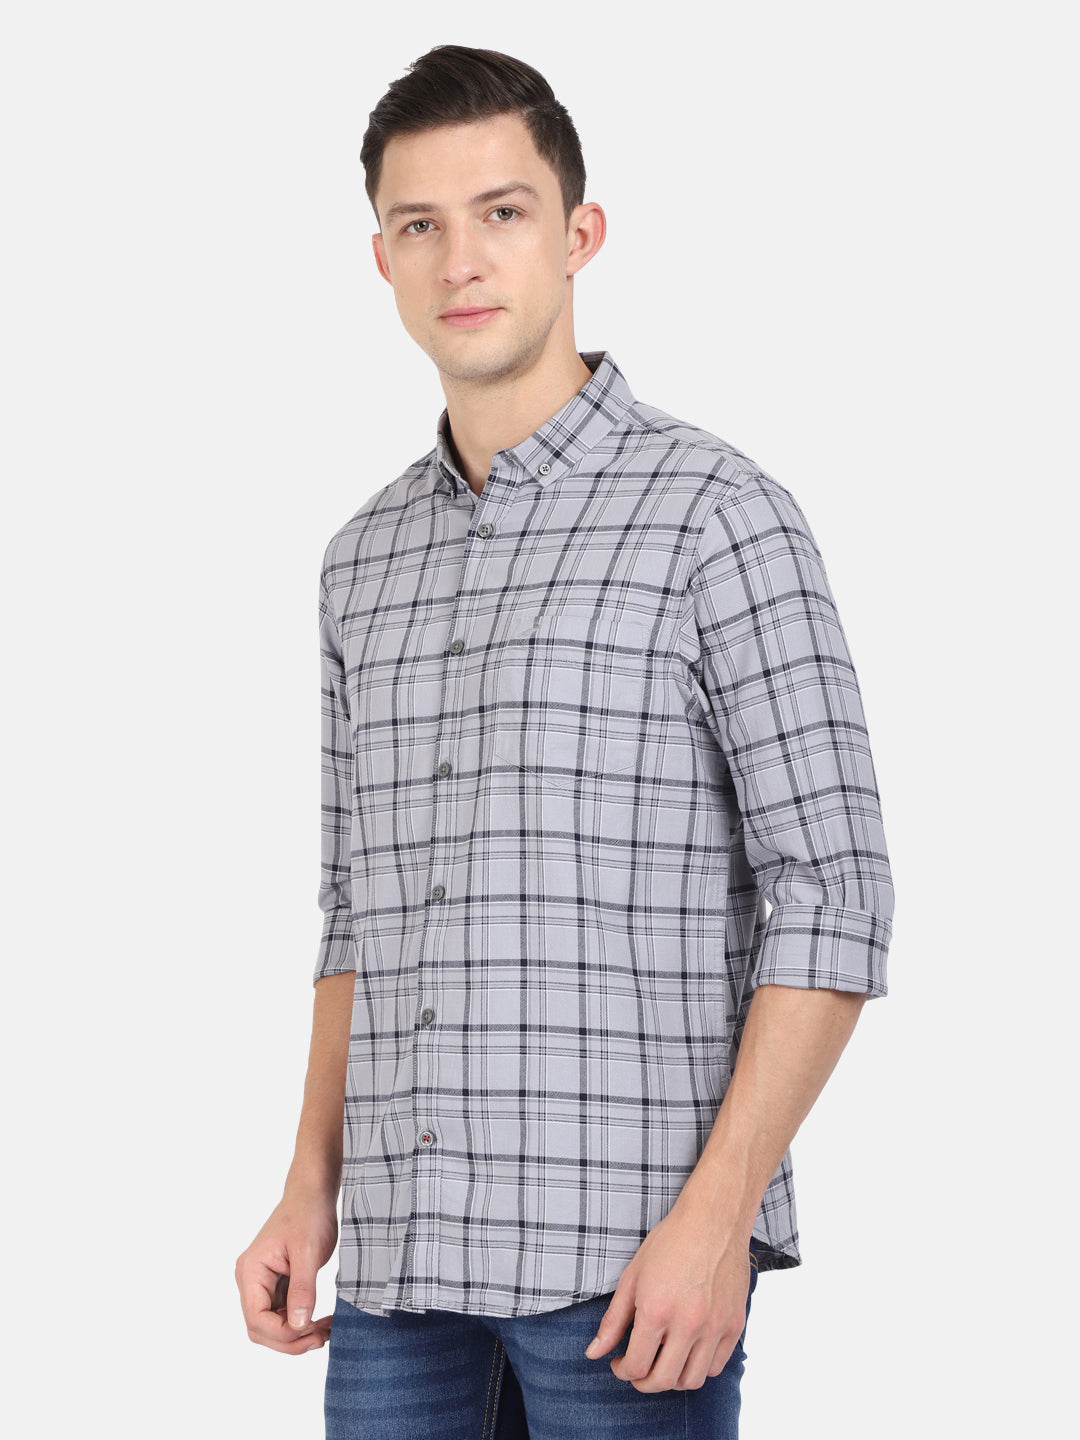 Casual Full Sleeve Comfort Fit Checks Grey with Collar Shirt for Men